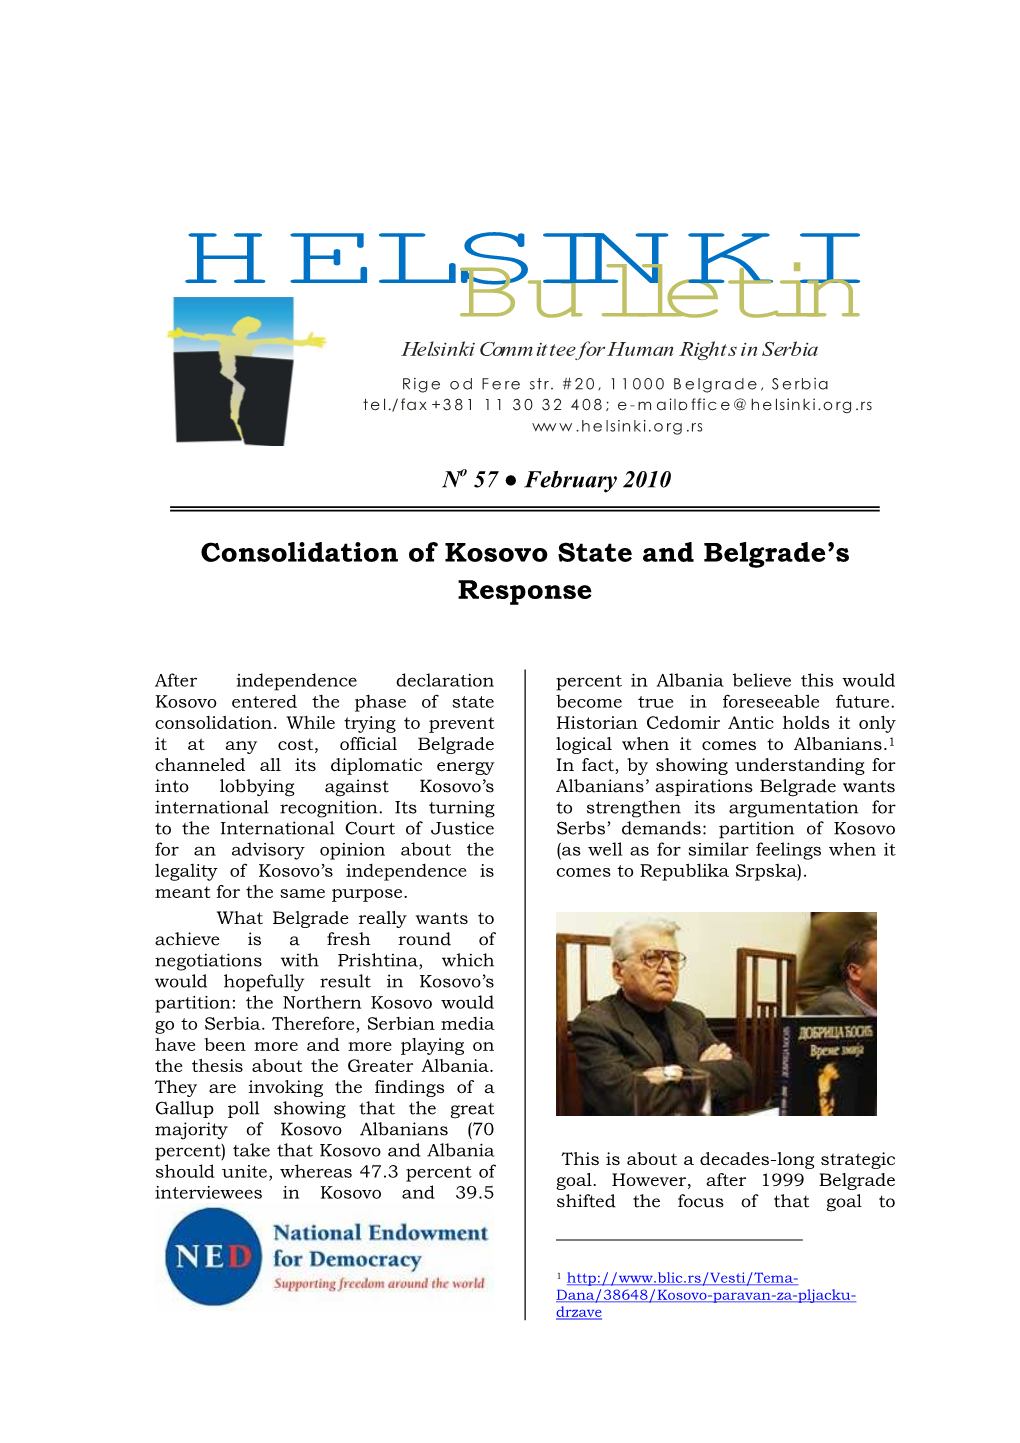 Consolidation of Kosovo State and Belgrade's Response